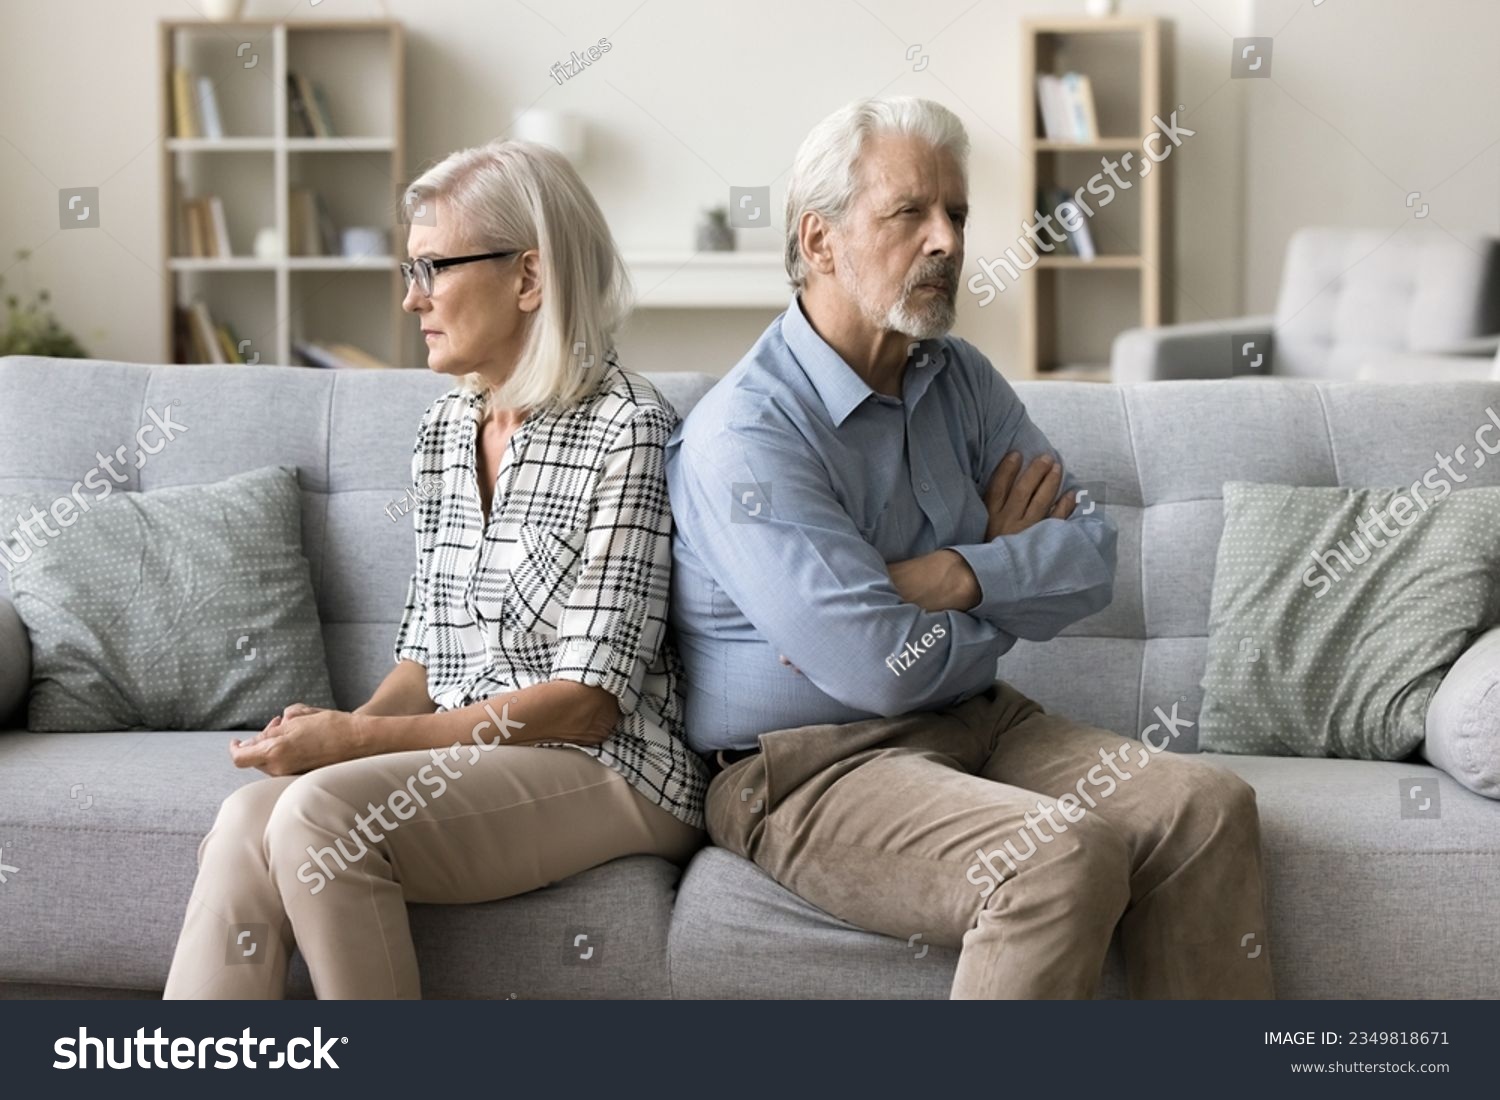 Annoyed ignoring senior couple sitting on home couch back to back, looking away, keeping silence after arguing, thinking on breakup, separation, relationship problems, conflict #2349818671